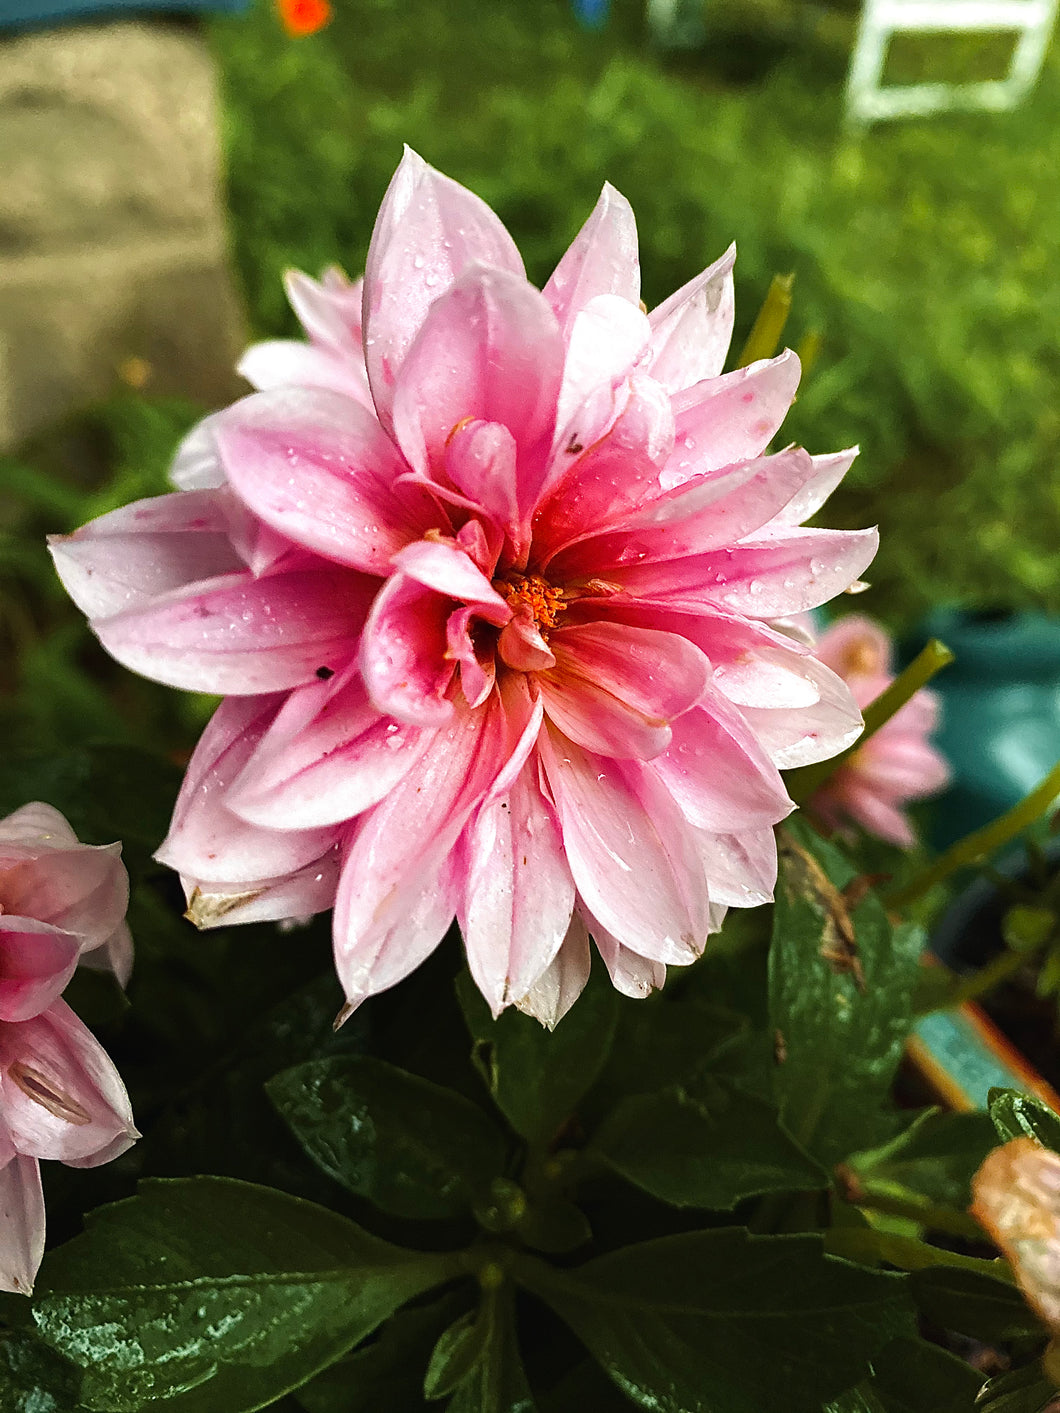 Dahlia Flower Essence (For Strength, Confidence, Empowerment, and Resiliency)